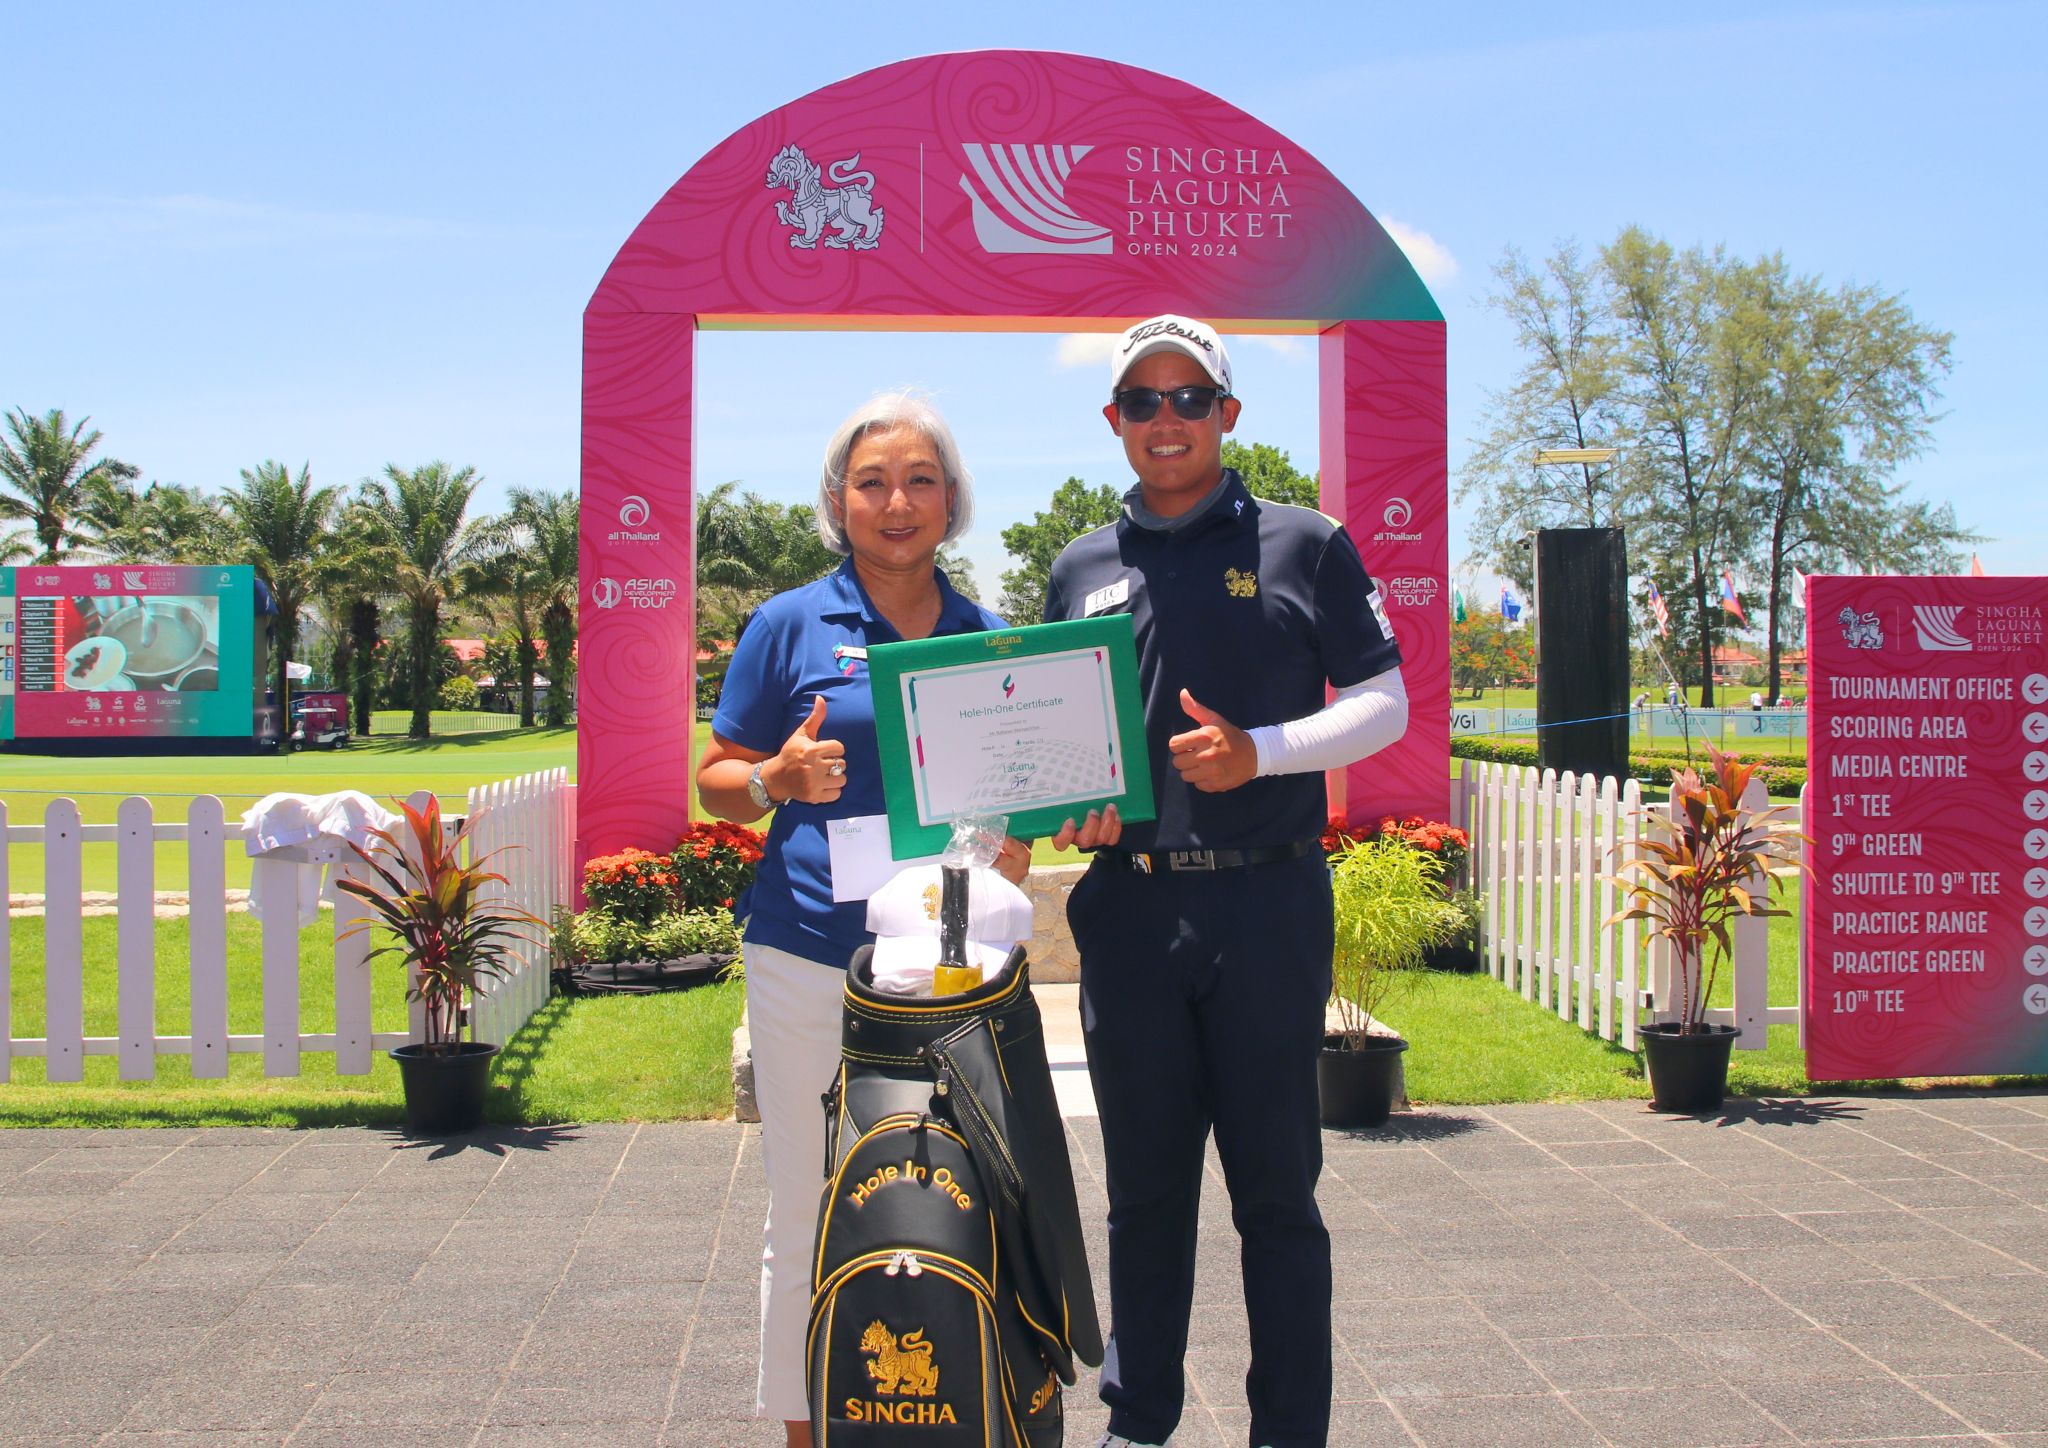 "Ratanon Wannasrichan - Made a hole-in-one on hole 16 and won a 7-night stay at Banyan Tree Private Collection Villa"